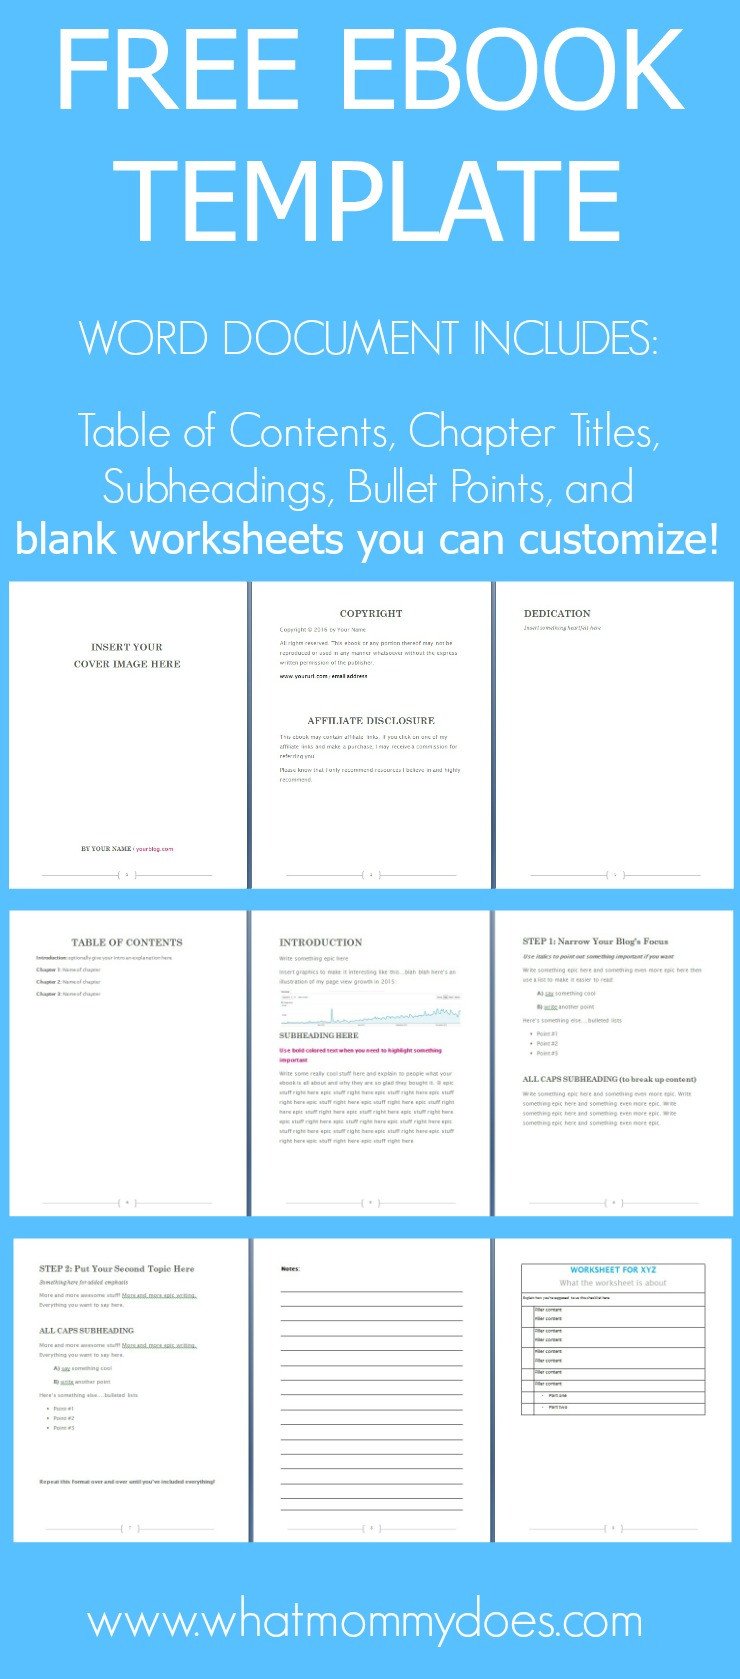 Free Ebook Template Preformatted Word Document What